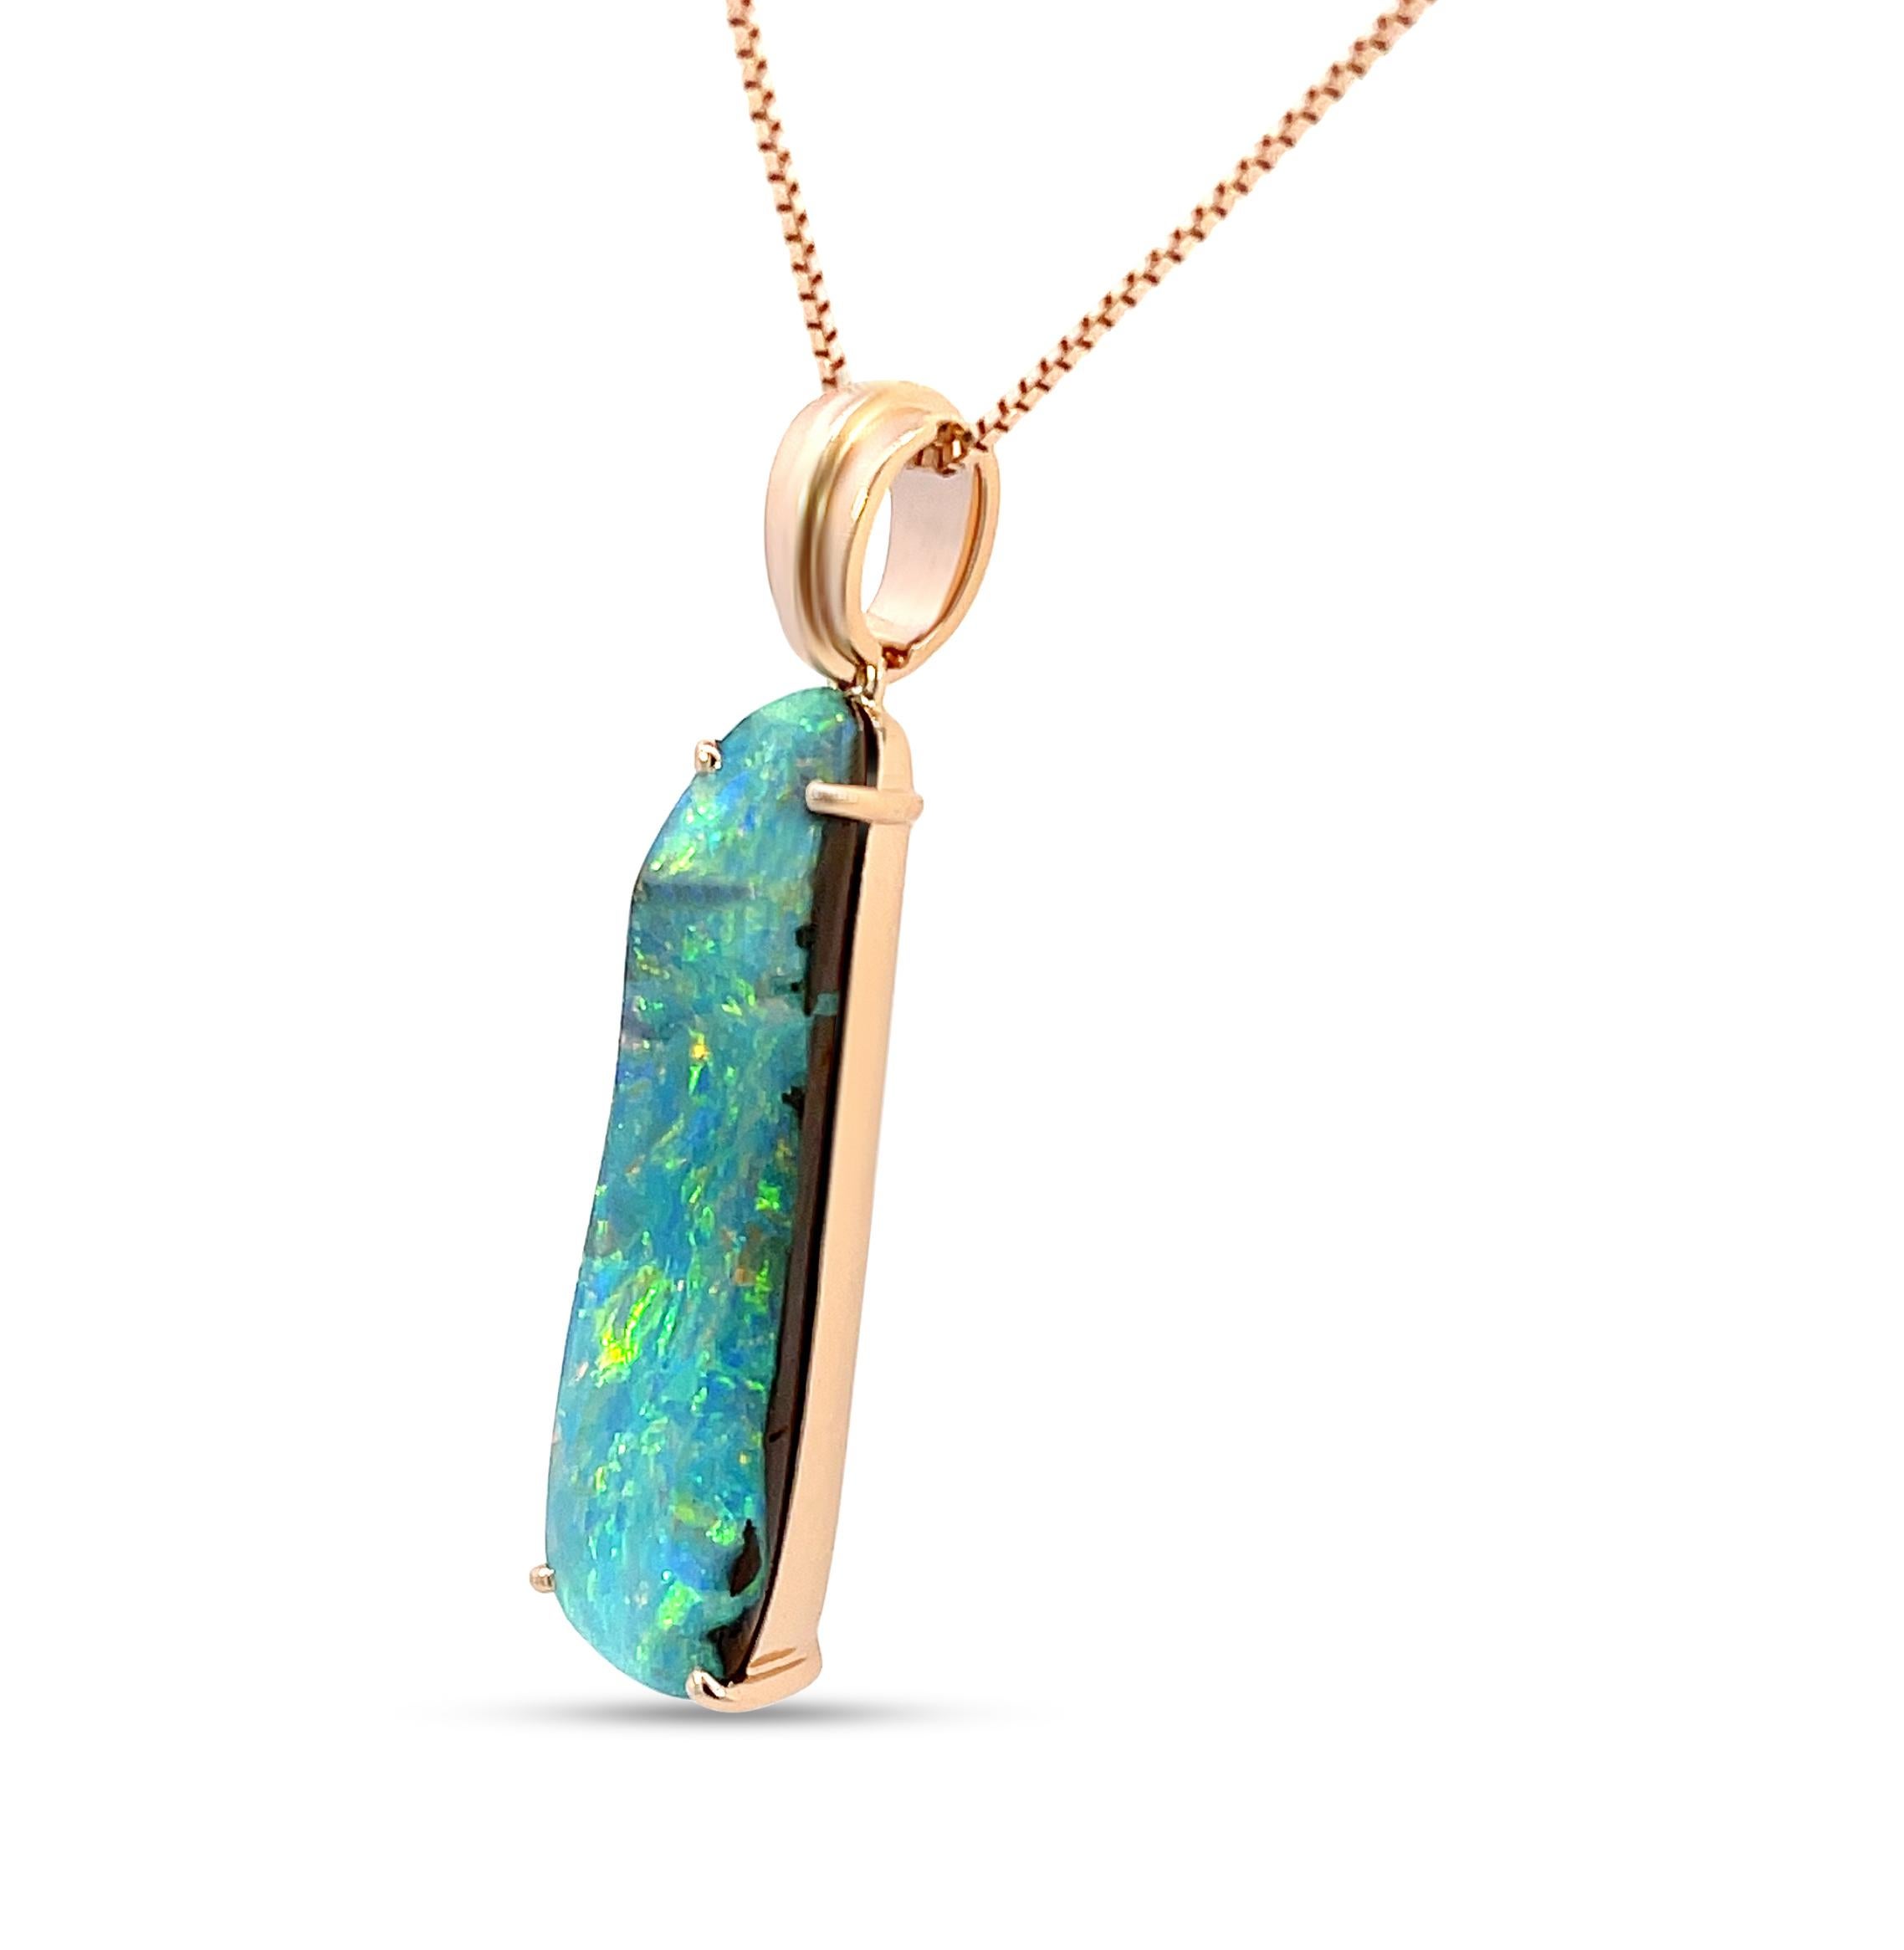 Exquisite and regal is the ‘Mystery of Love’ opal pendant featuring a simple design and sophisticated look. The marvellous 10.94ct boulder opal sourced from Winton fields, Australia, presents a most alluring play-of-colour which reveal the beauty of